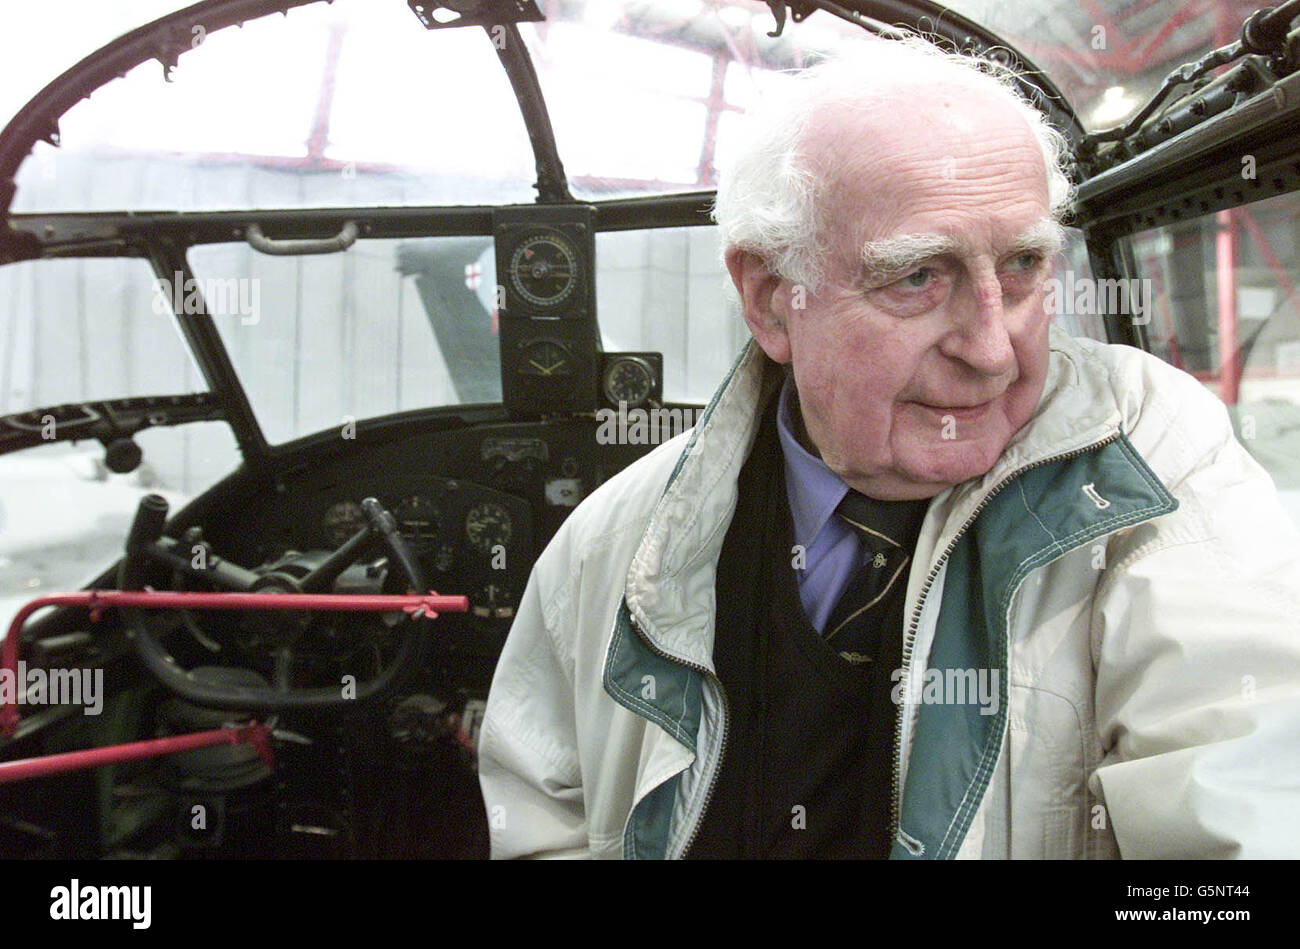 Peter George, 1st Officer with the Air Transport Auxiliary, sits in the cockpit of a Lancaster Bomber during celebrations to mark the 60th anniversary of the plane's 2nd World War missions, at Duxford Air Museum, Cambridgeshire. * RAF veterans criticised the Ministry of Defence's failure to recognise the achievements of Bomber Command, feeling that campaign medals should have been awarded to the crews despite the controversy caused by the number of civilians killed during the bombing raids over Germany, which are seen as a vital contribution to the Allied victory. Stock Photo